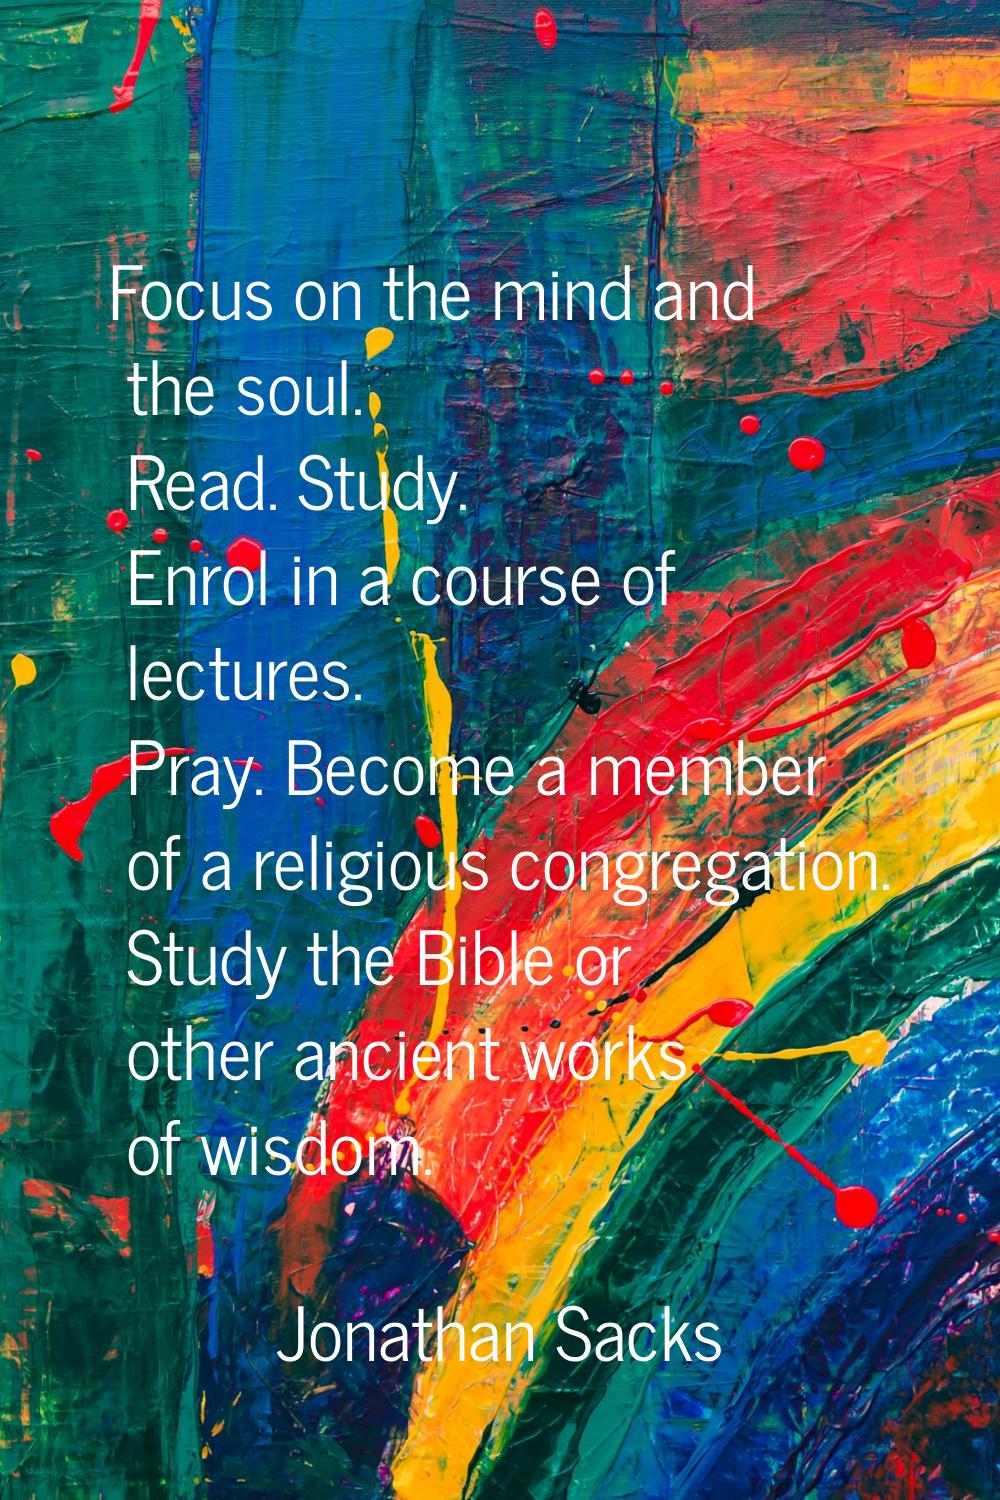 Focus on the mind and the soul. Read. Study. Enrol in a course of lectures. Pray. Become a member o